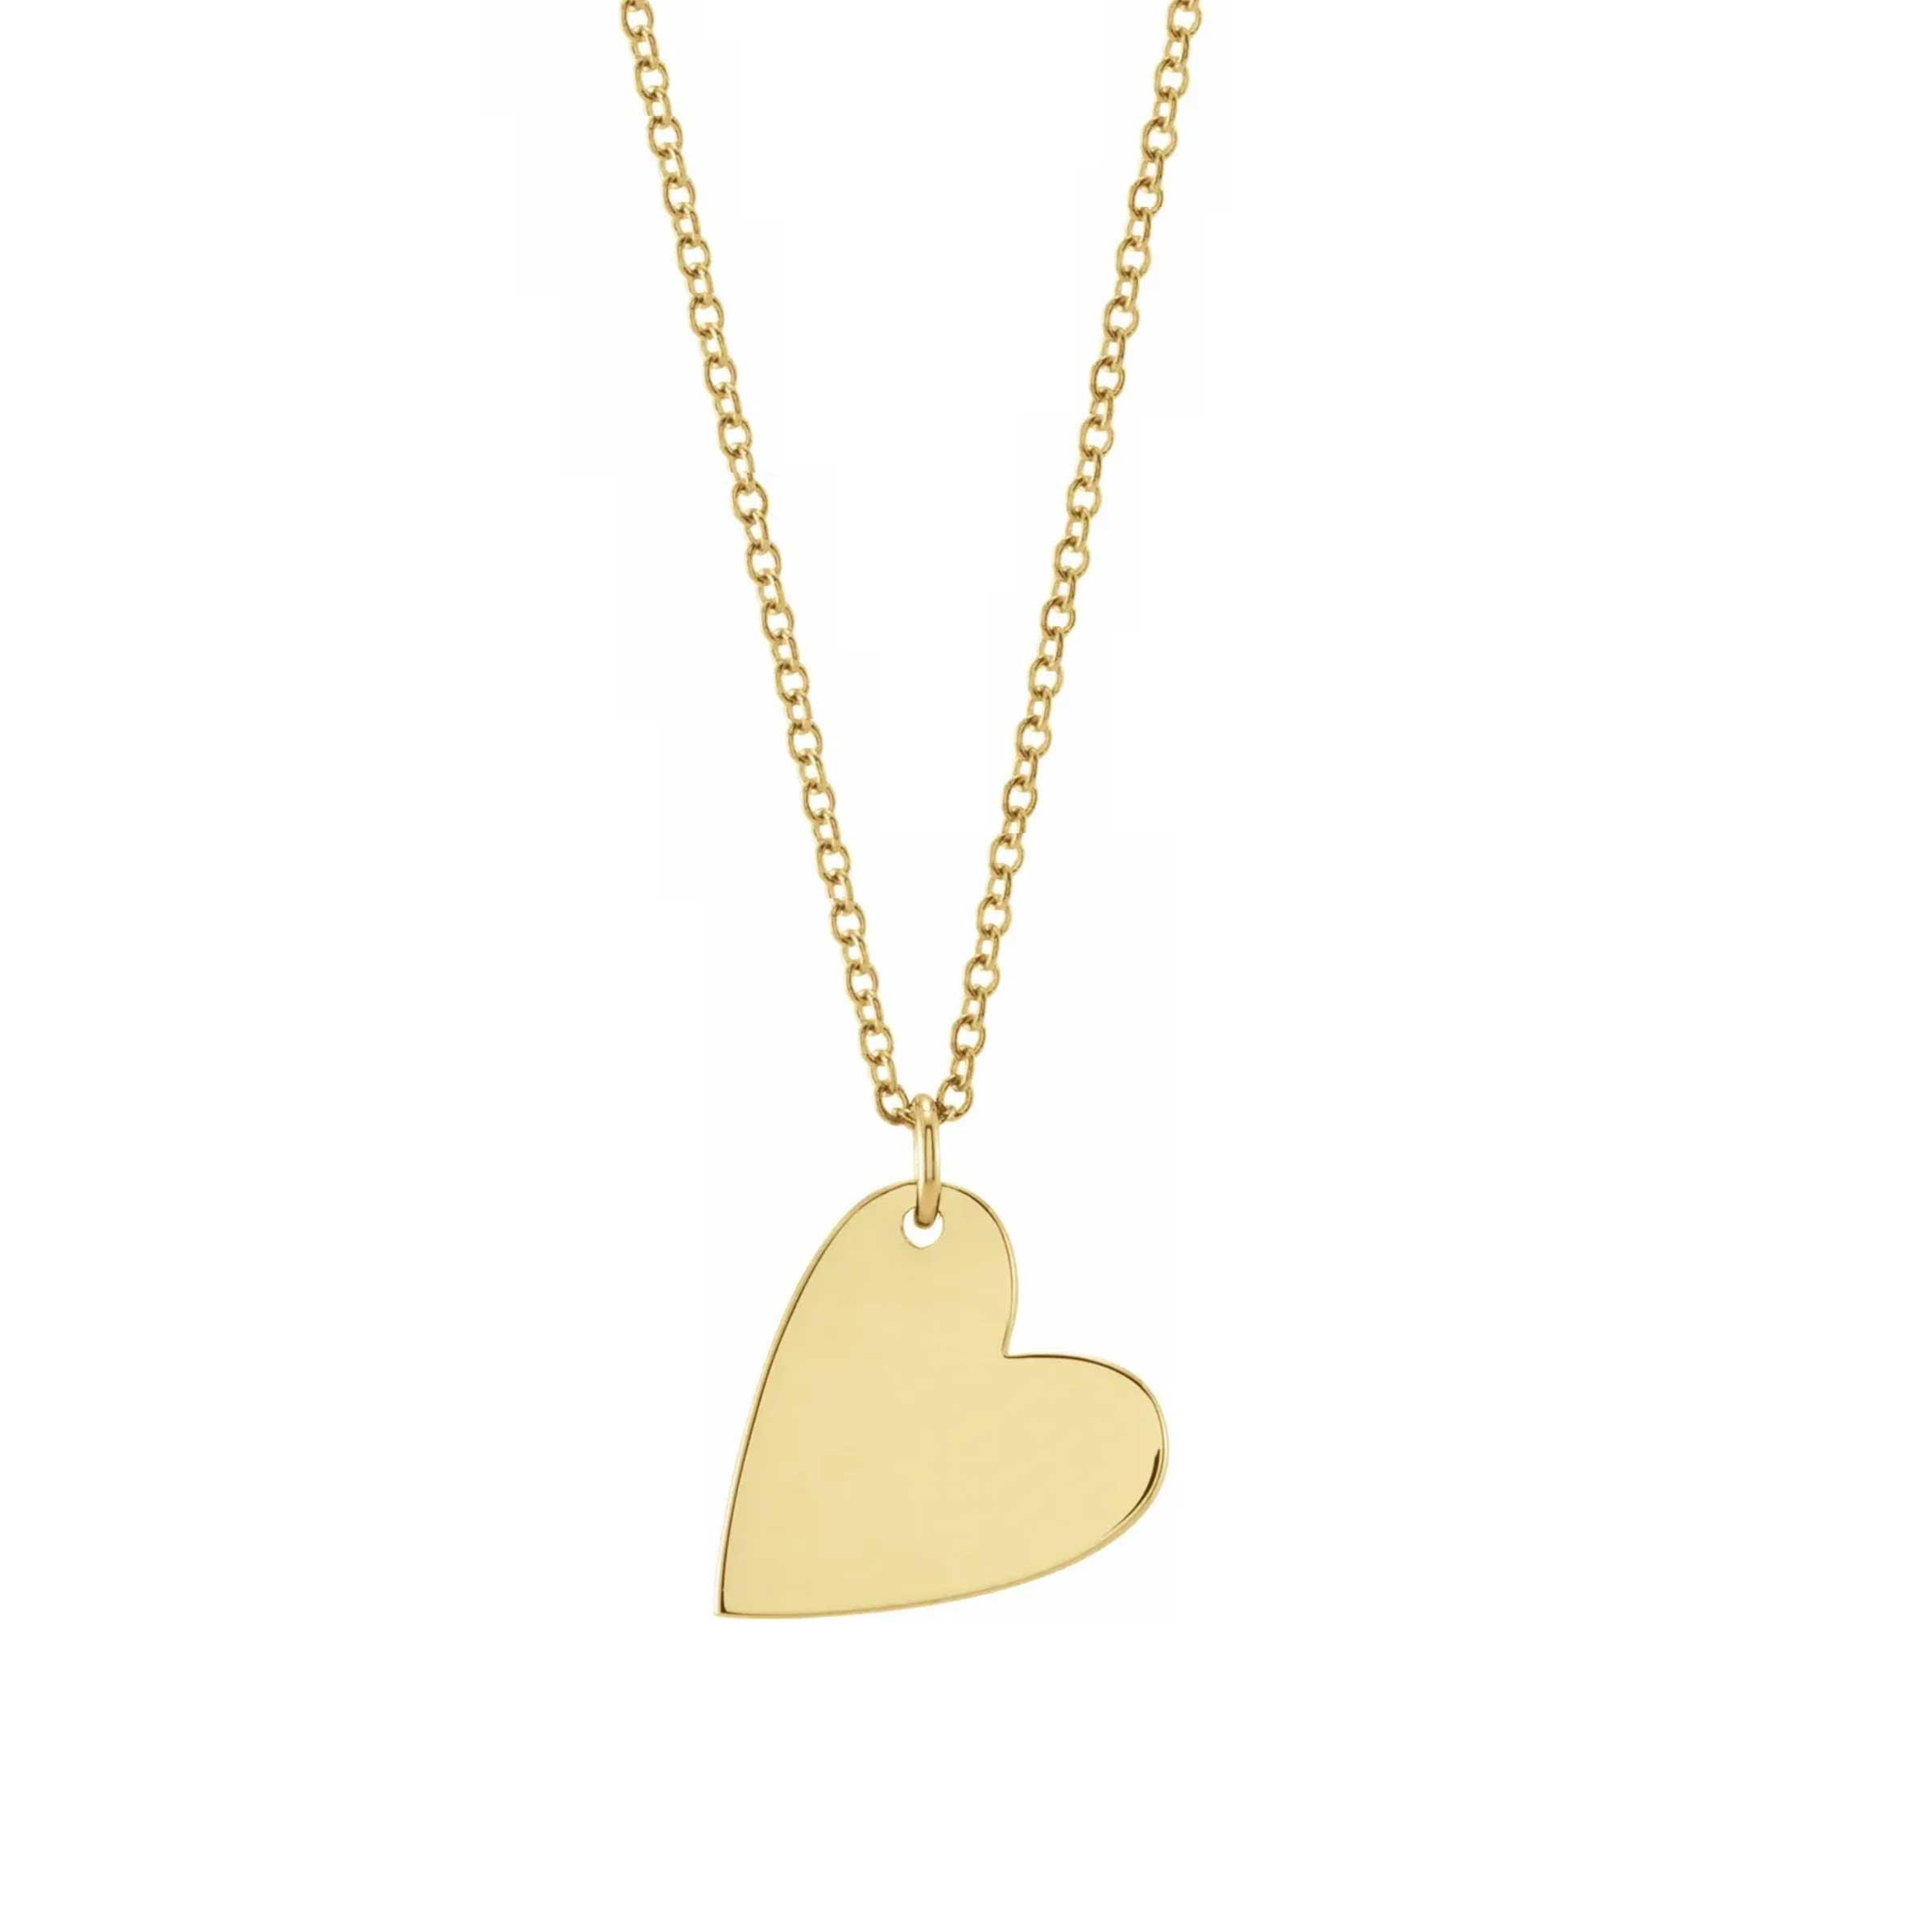 Buy Small Heart Locket Necklace Gold Charm Necklace Gold Heart Locket  Jewelry Gift for Her Valentine's Day Gift Minimalist Jewelry Gold Jewelry  Online in India - Etsy